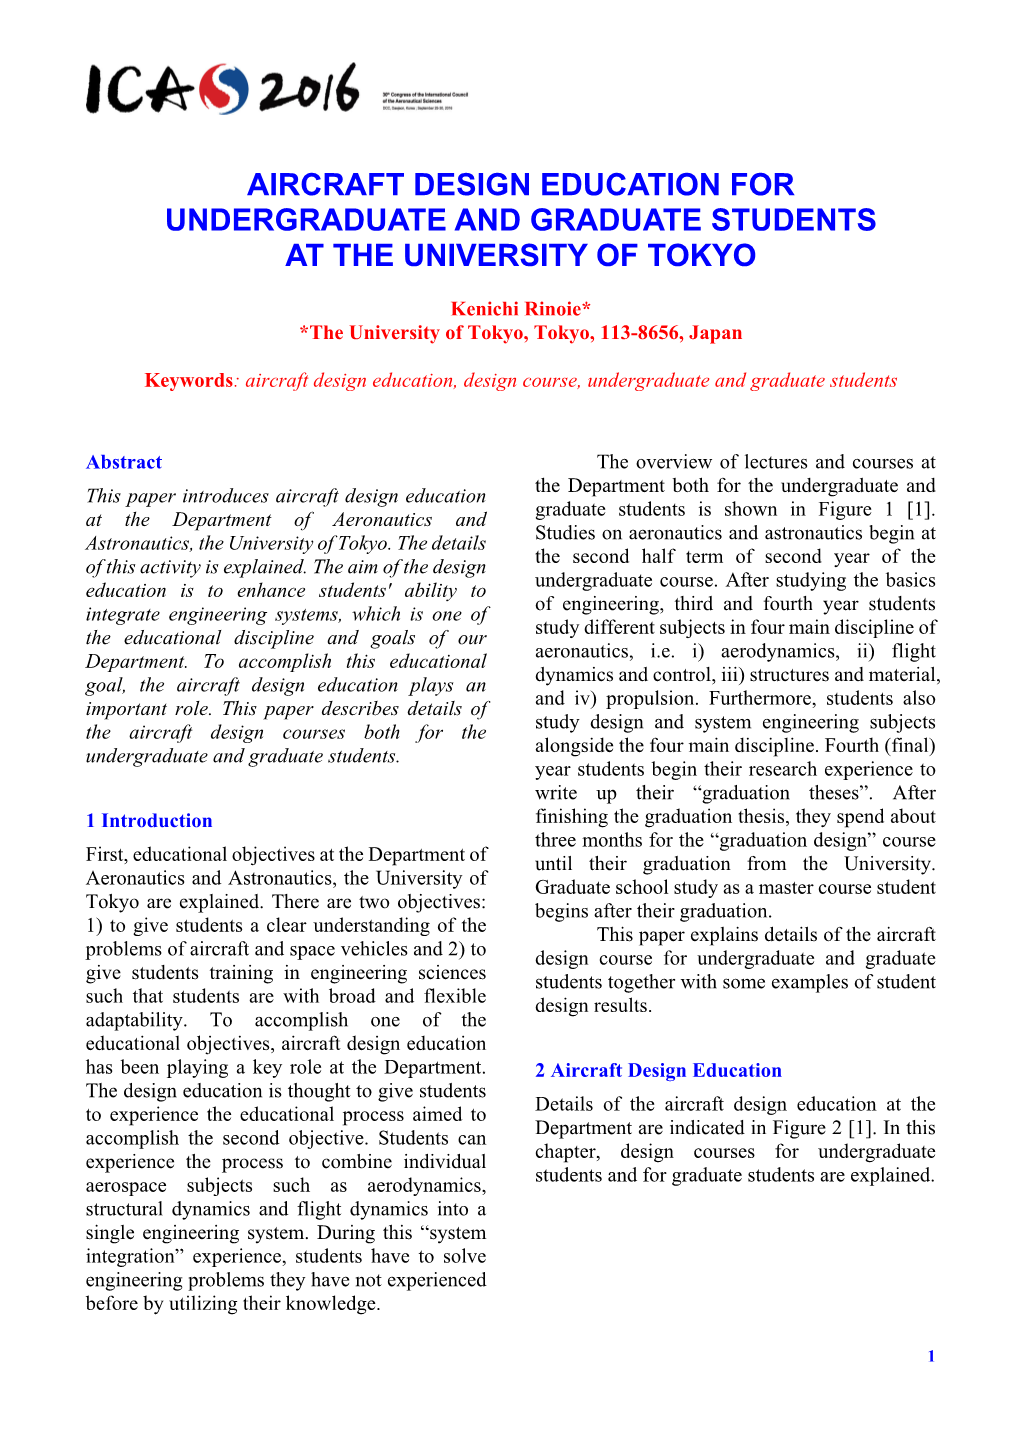 Aircraft Design Education for Undergraduate and Graduate Students at the University of Tokyo